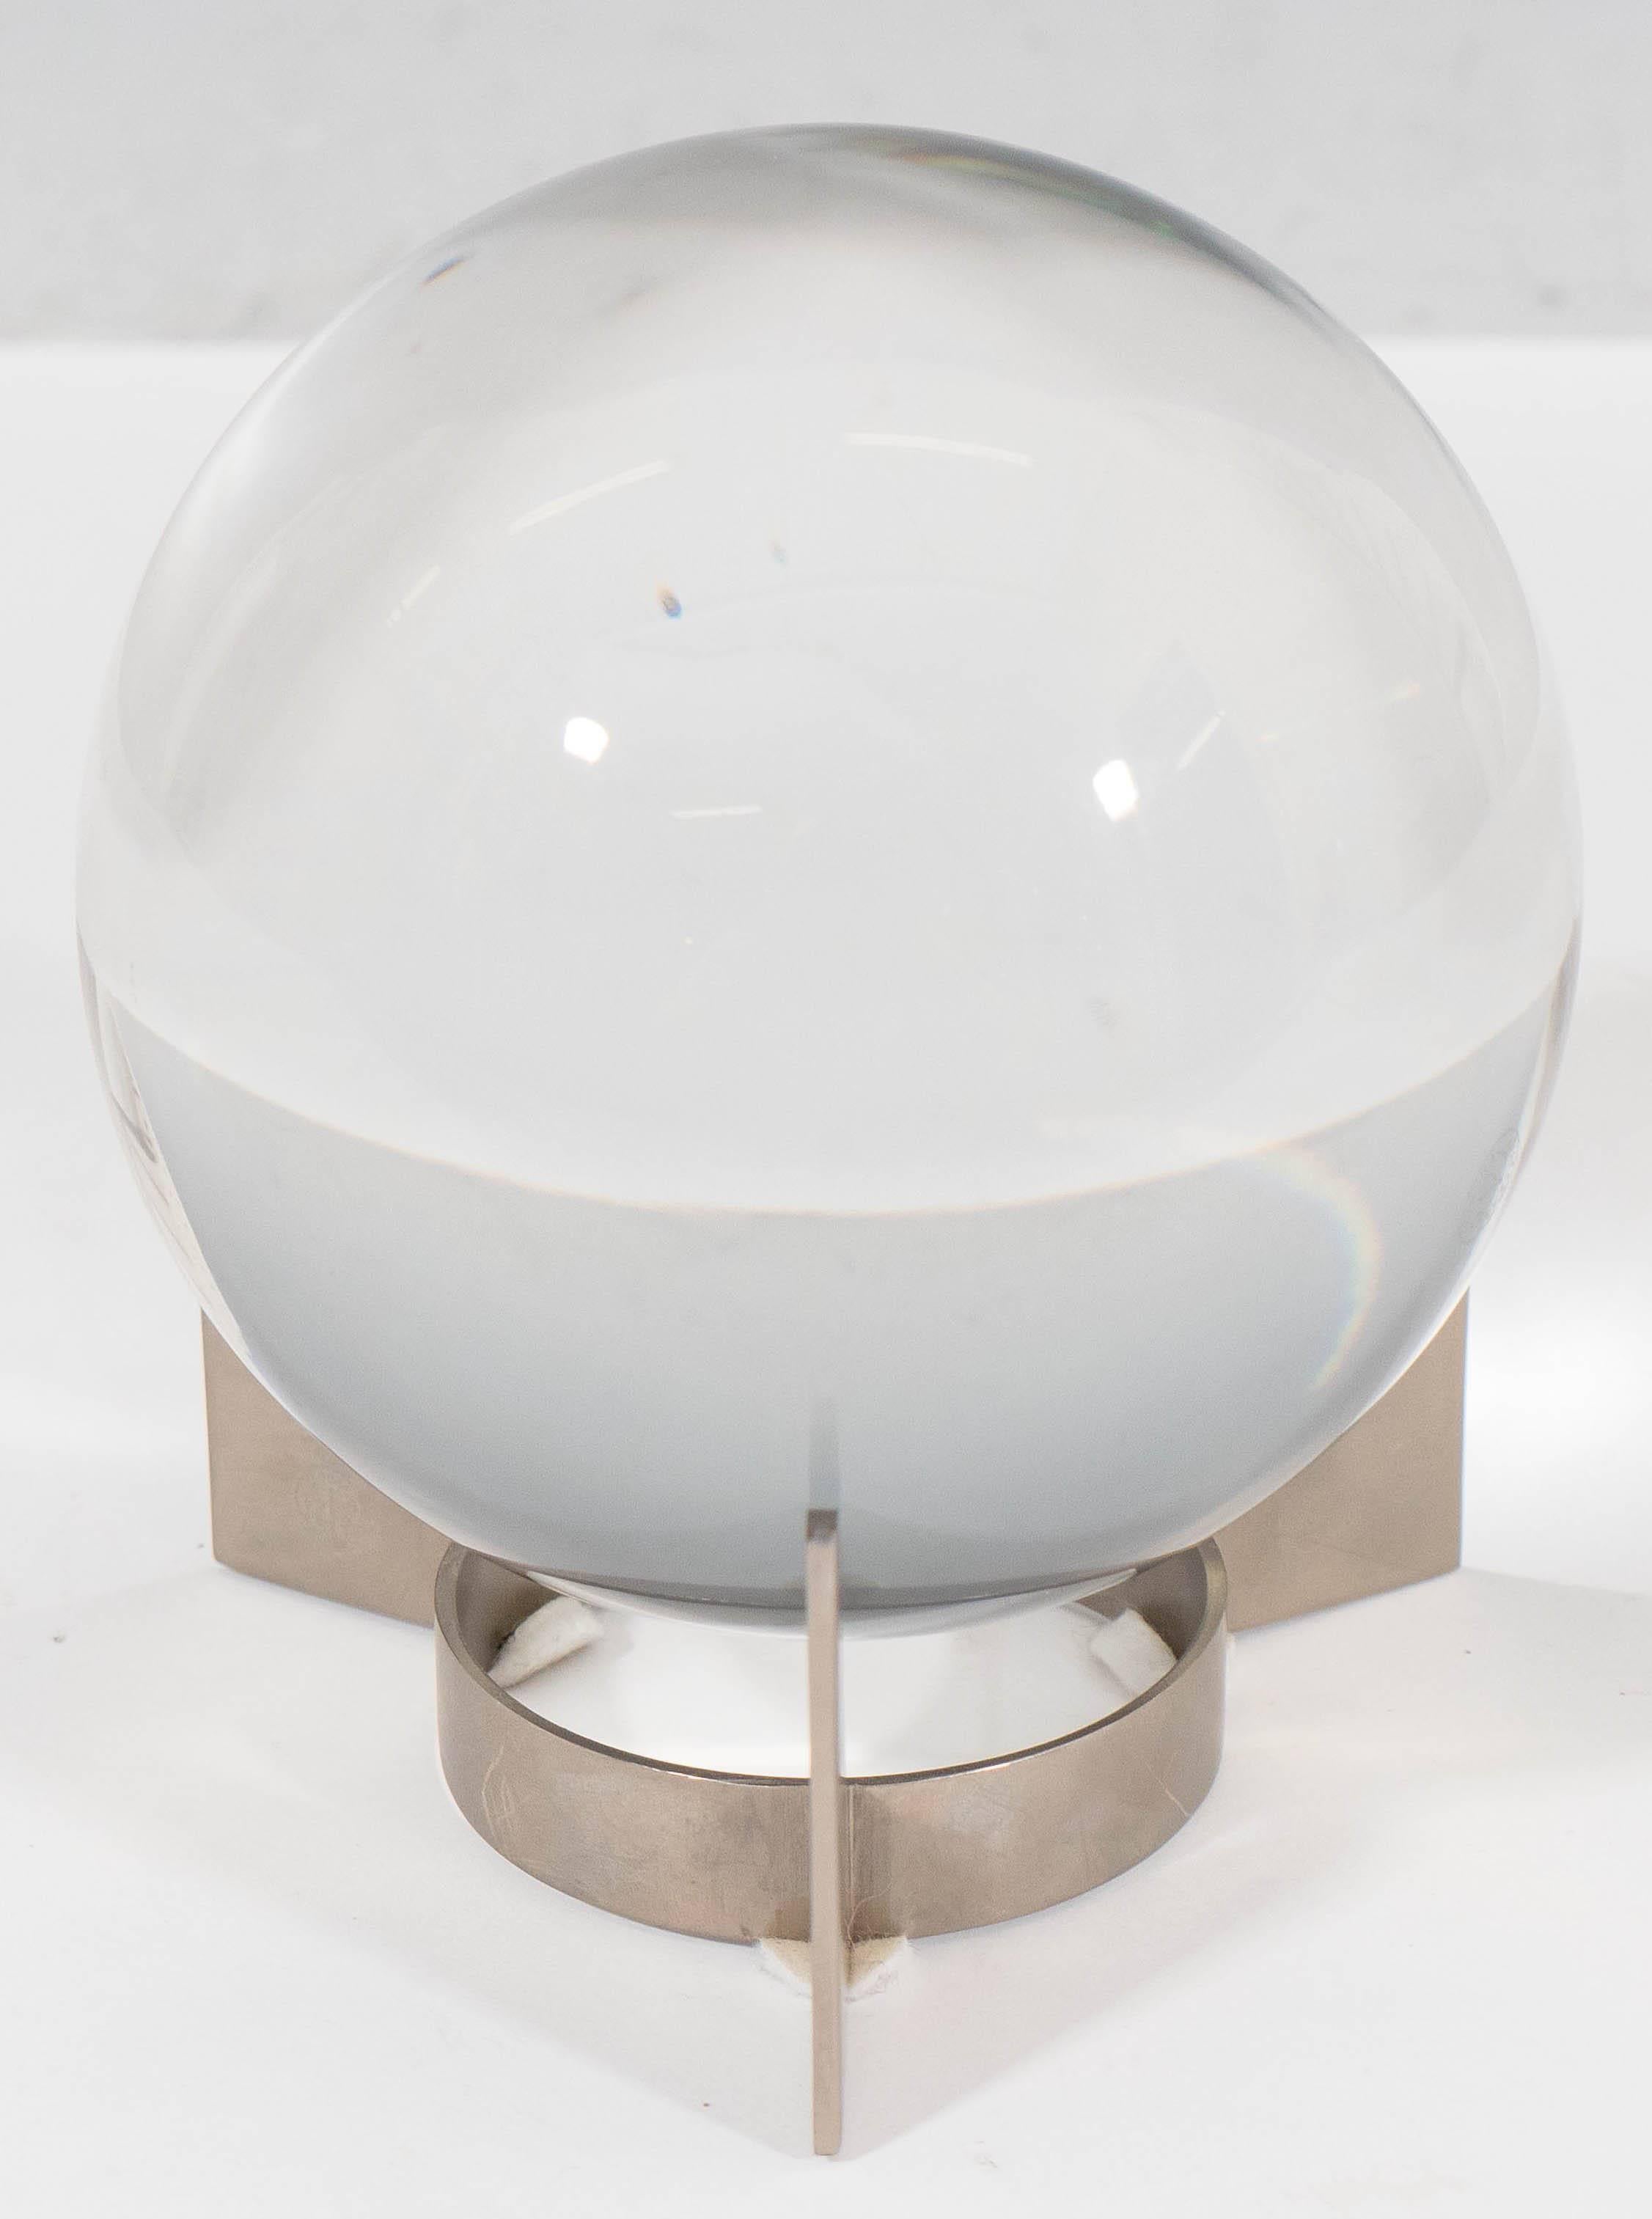 Modern Baccarat Sirius Crystal Ball on Nickel Plate Stand by Jacques Adnet